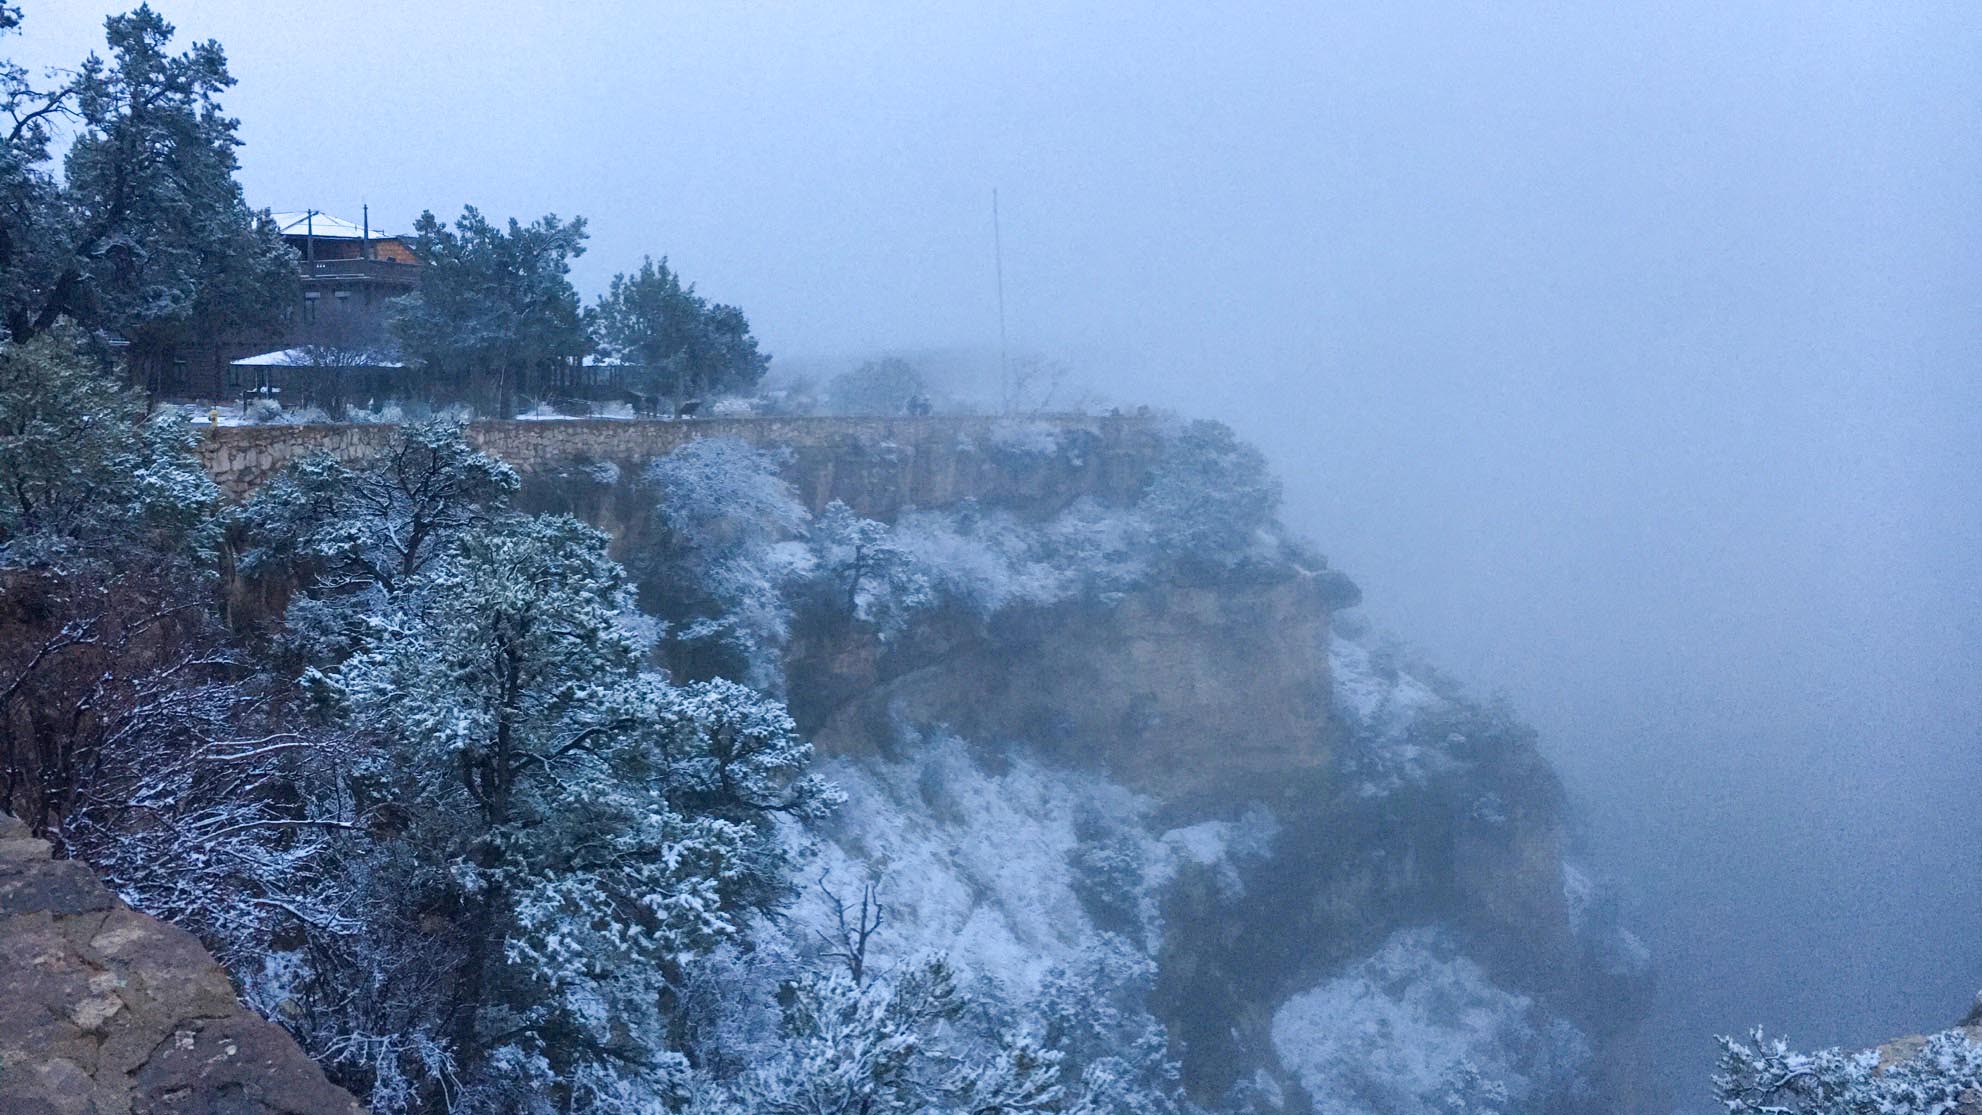 snow covered trees and vegetation descending the side of a cliff. Fog blocks the view of the landscape.